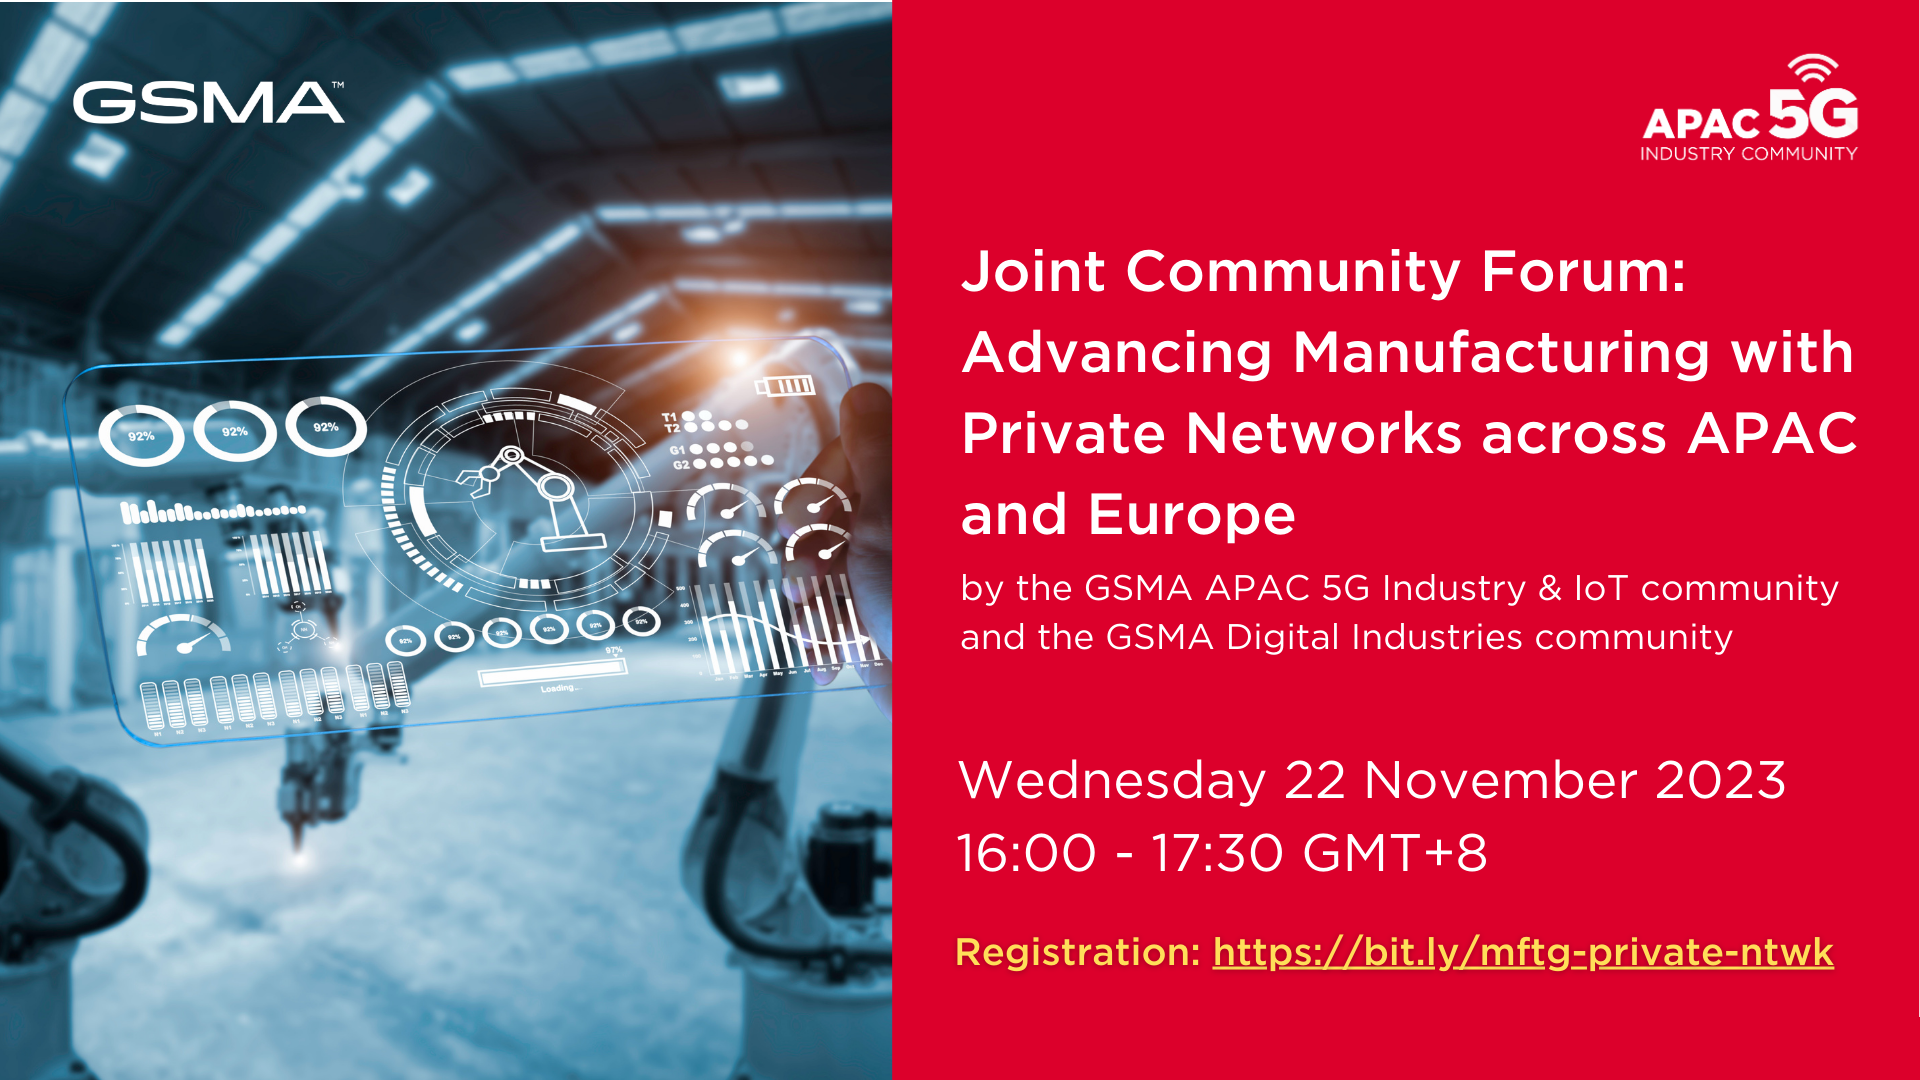 Joint Community Forum: Advancing Manufacturing with Private Networks across APAC and Europe